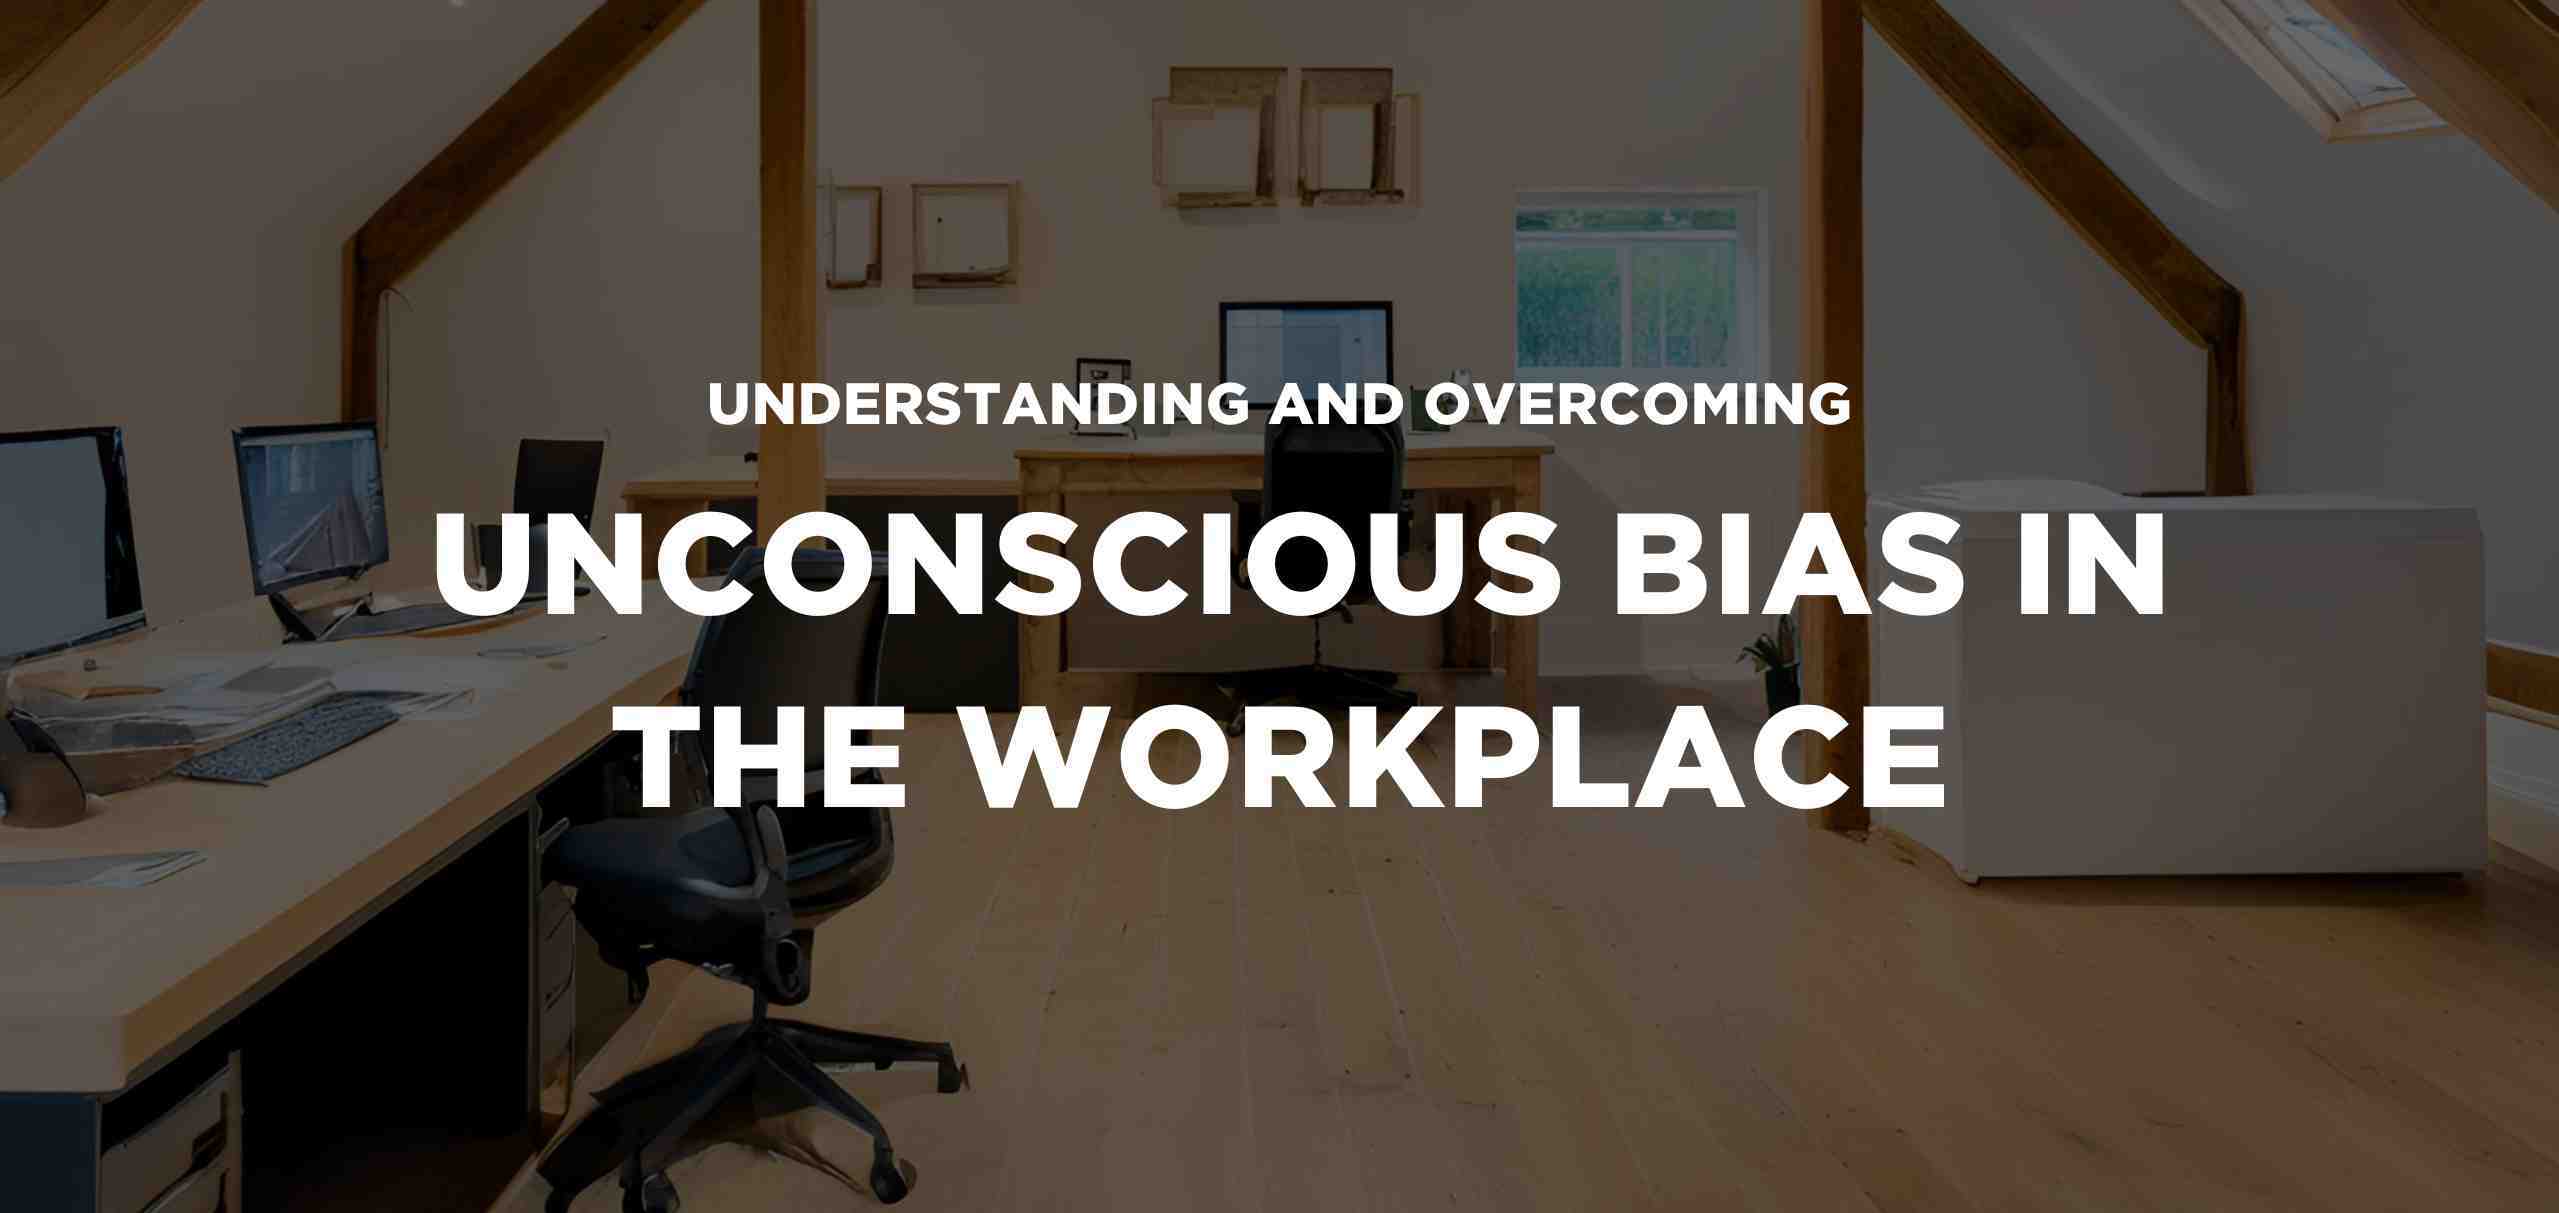 Understanding and overcoming unconscious bias in the workplace